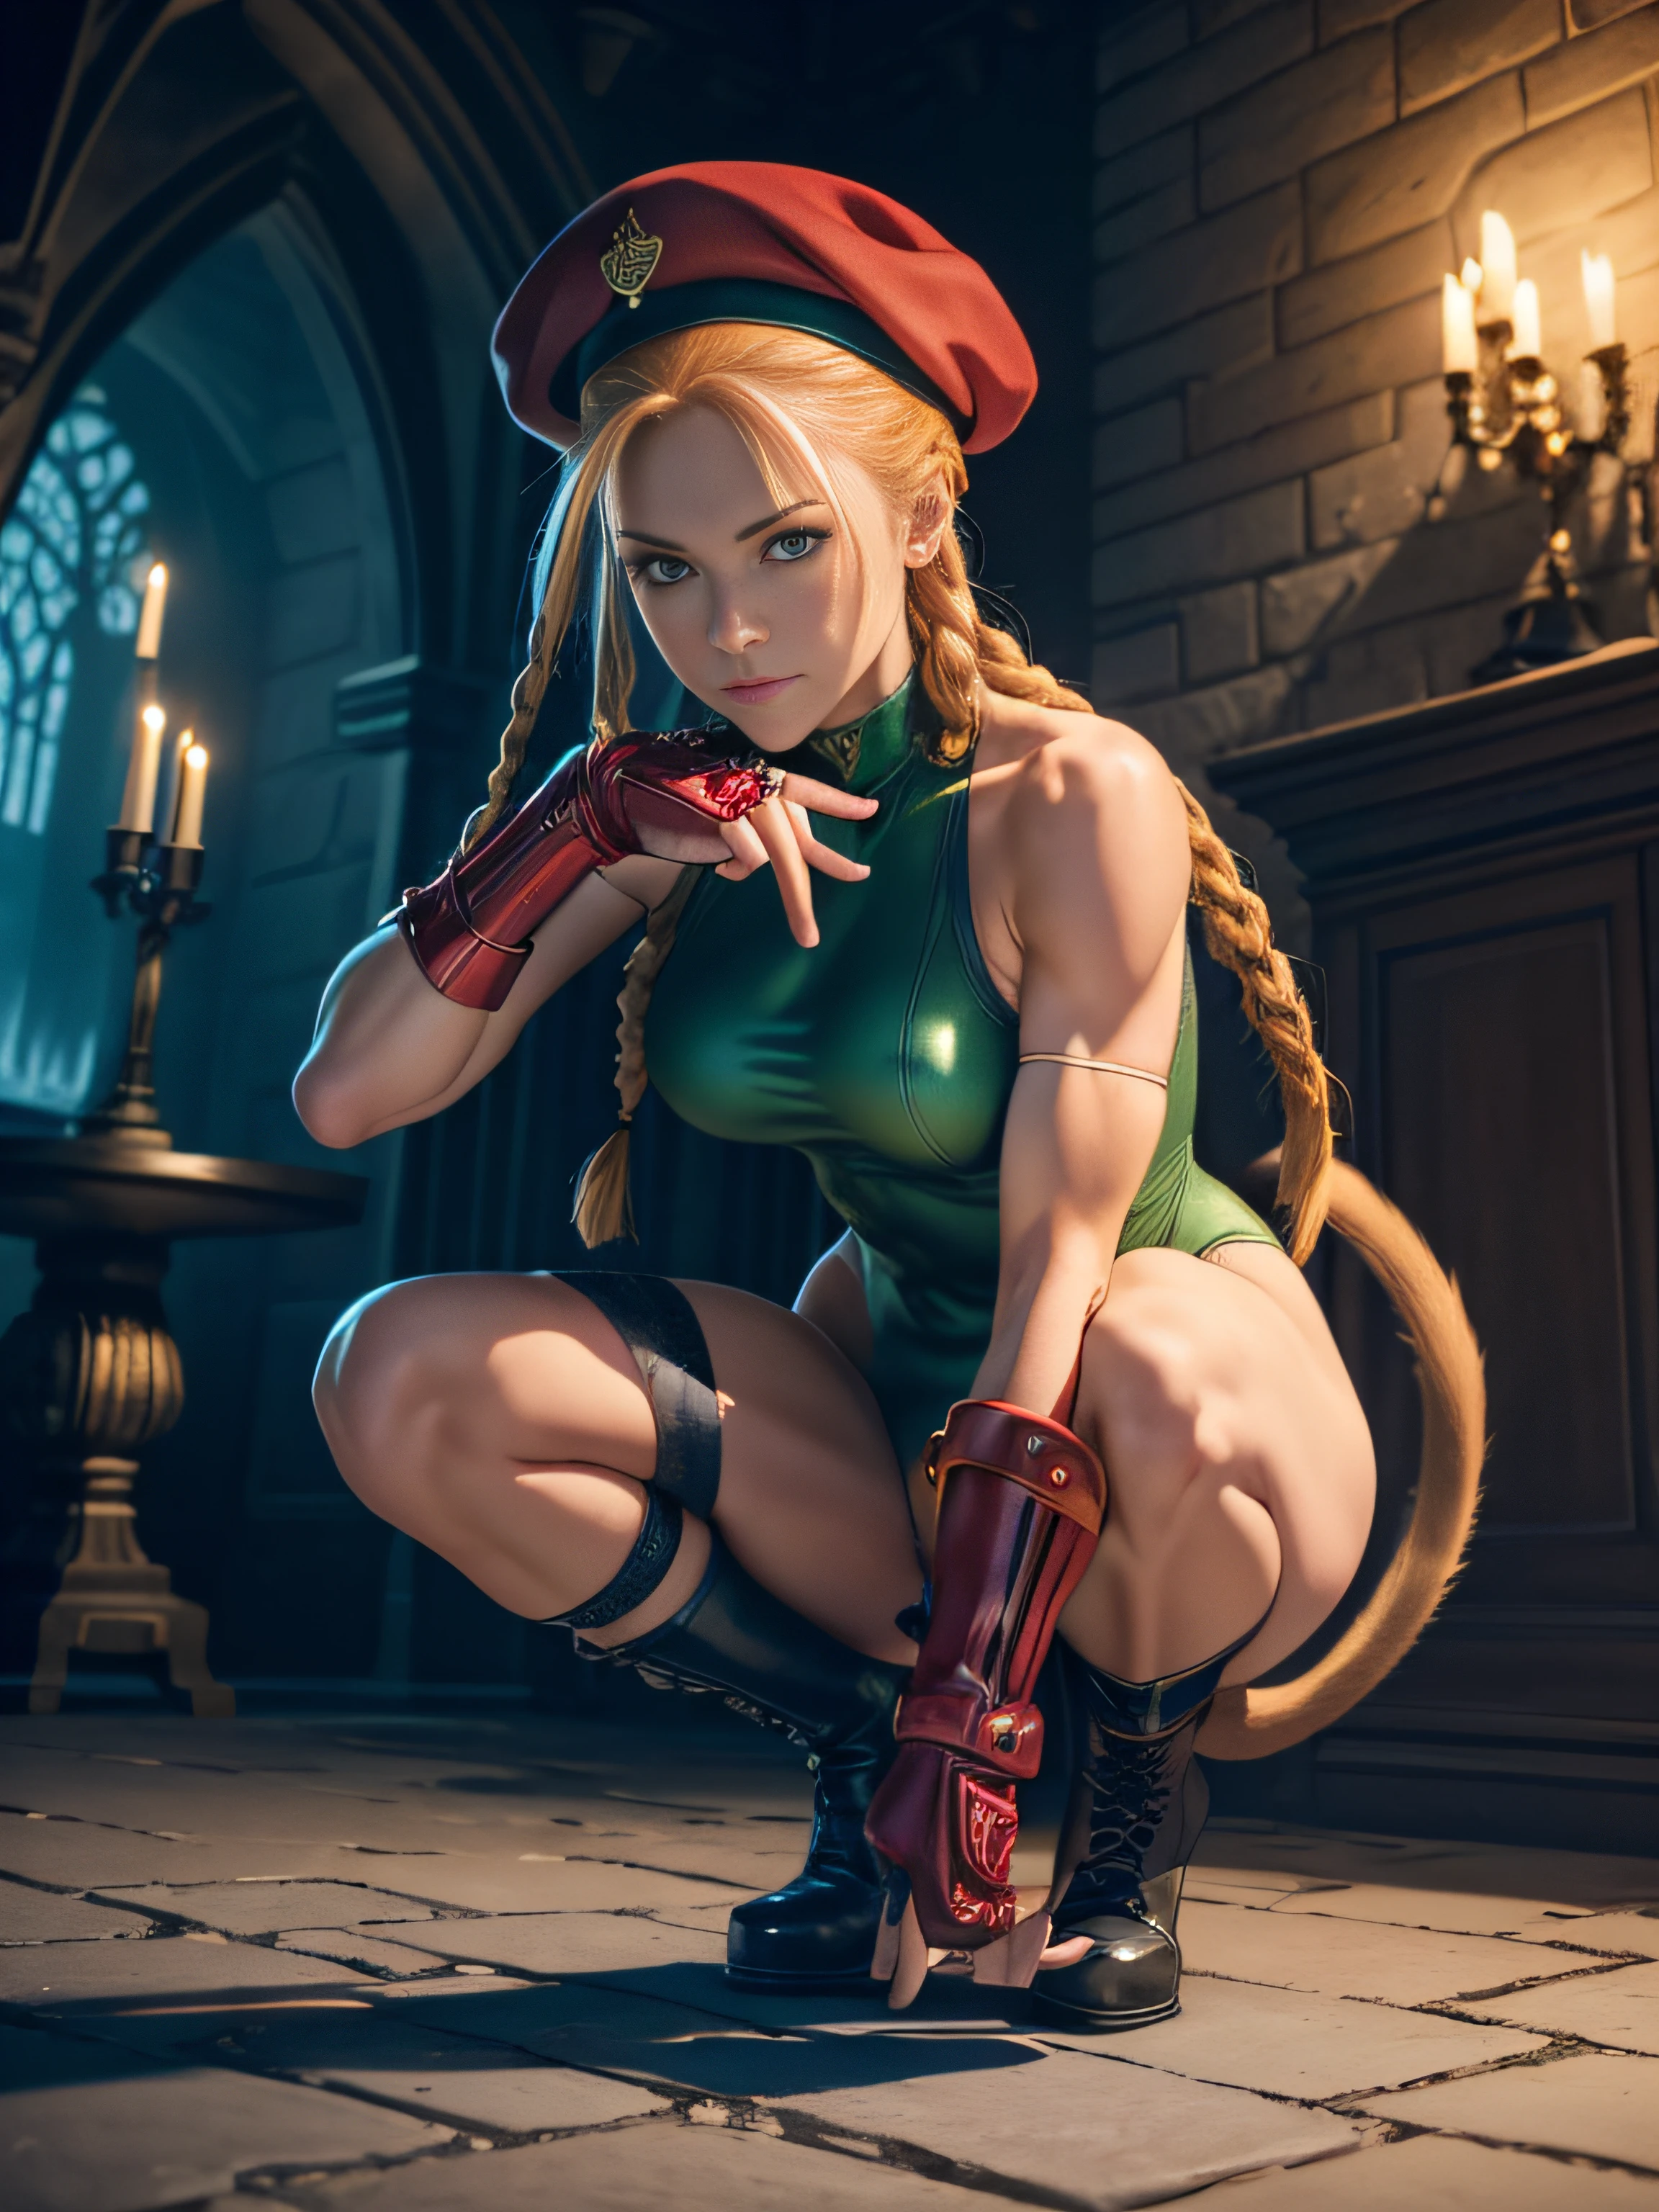 "(exquisitely detailed CG unity 8k wallpaper, masterpiece-quality with stunning realism), (best illumination, best shadow), (best quality), (elegant and demonic style:1.2), Arti modern anime. angled view, heroic pose, closeup full body portrait of stunningly beautiful mature cammy from street fighter, Masterpiece, best quality, highres, , Cammy white, twin braids, long hair, blonde hair, antenna hair, beret, (red headwear:1.3), blue eyes, scar on cheek, green tight leotard, large breasts, sleeveless, red gloves, fingerless gloves, camouflage, hard , large ass, abs, a little muscular, revealing, depth of field blur effect, night, full zoom, action portrait, photorealistic. cinematic lighting, highly detailed. best quality, 4k, Better hand, perfect anatomy, leaning forward, foreshortening effects, coy flirty sexy expression, foreshortening effect, (piercing eyes:0.8), surrounded by an ominous and dark atmosphere, accentuated by dramatic and striking lighting, imbued with a sense of surreal fantasy". (patting a small cat:1.5) wearing laced military boots:1.5), (inside an extravagant British castle at night:1.5) (happy and smiling:1)(crouching down:1)